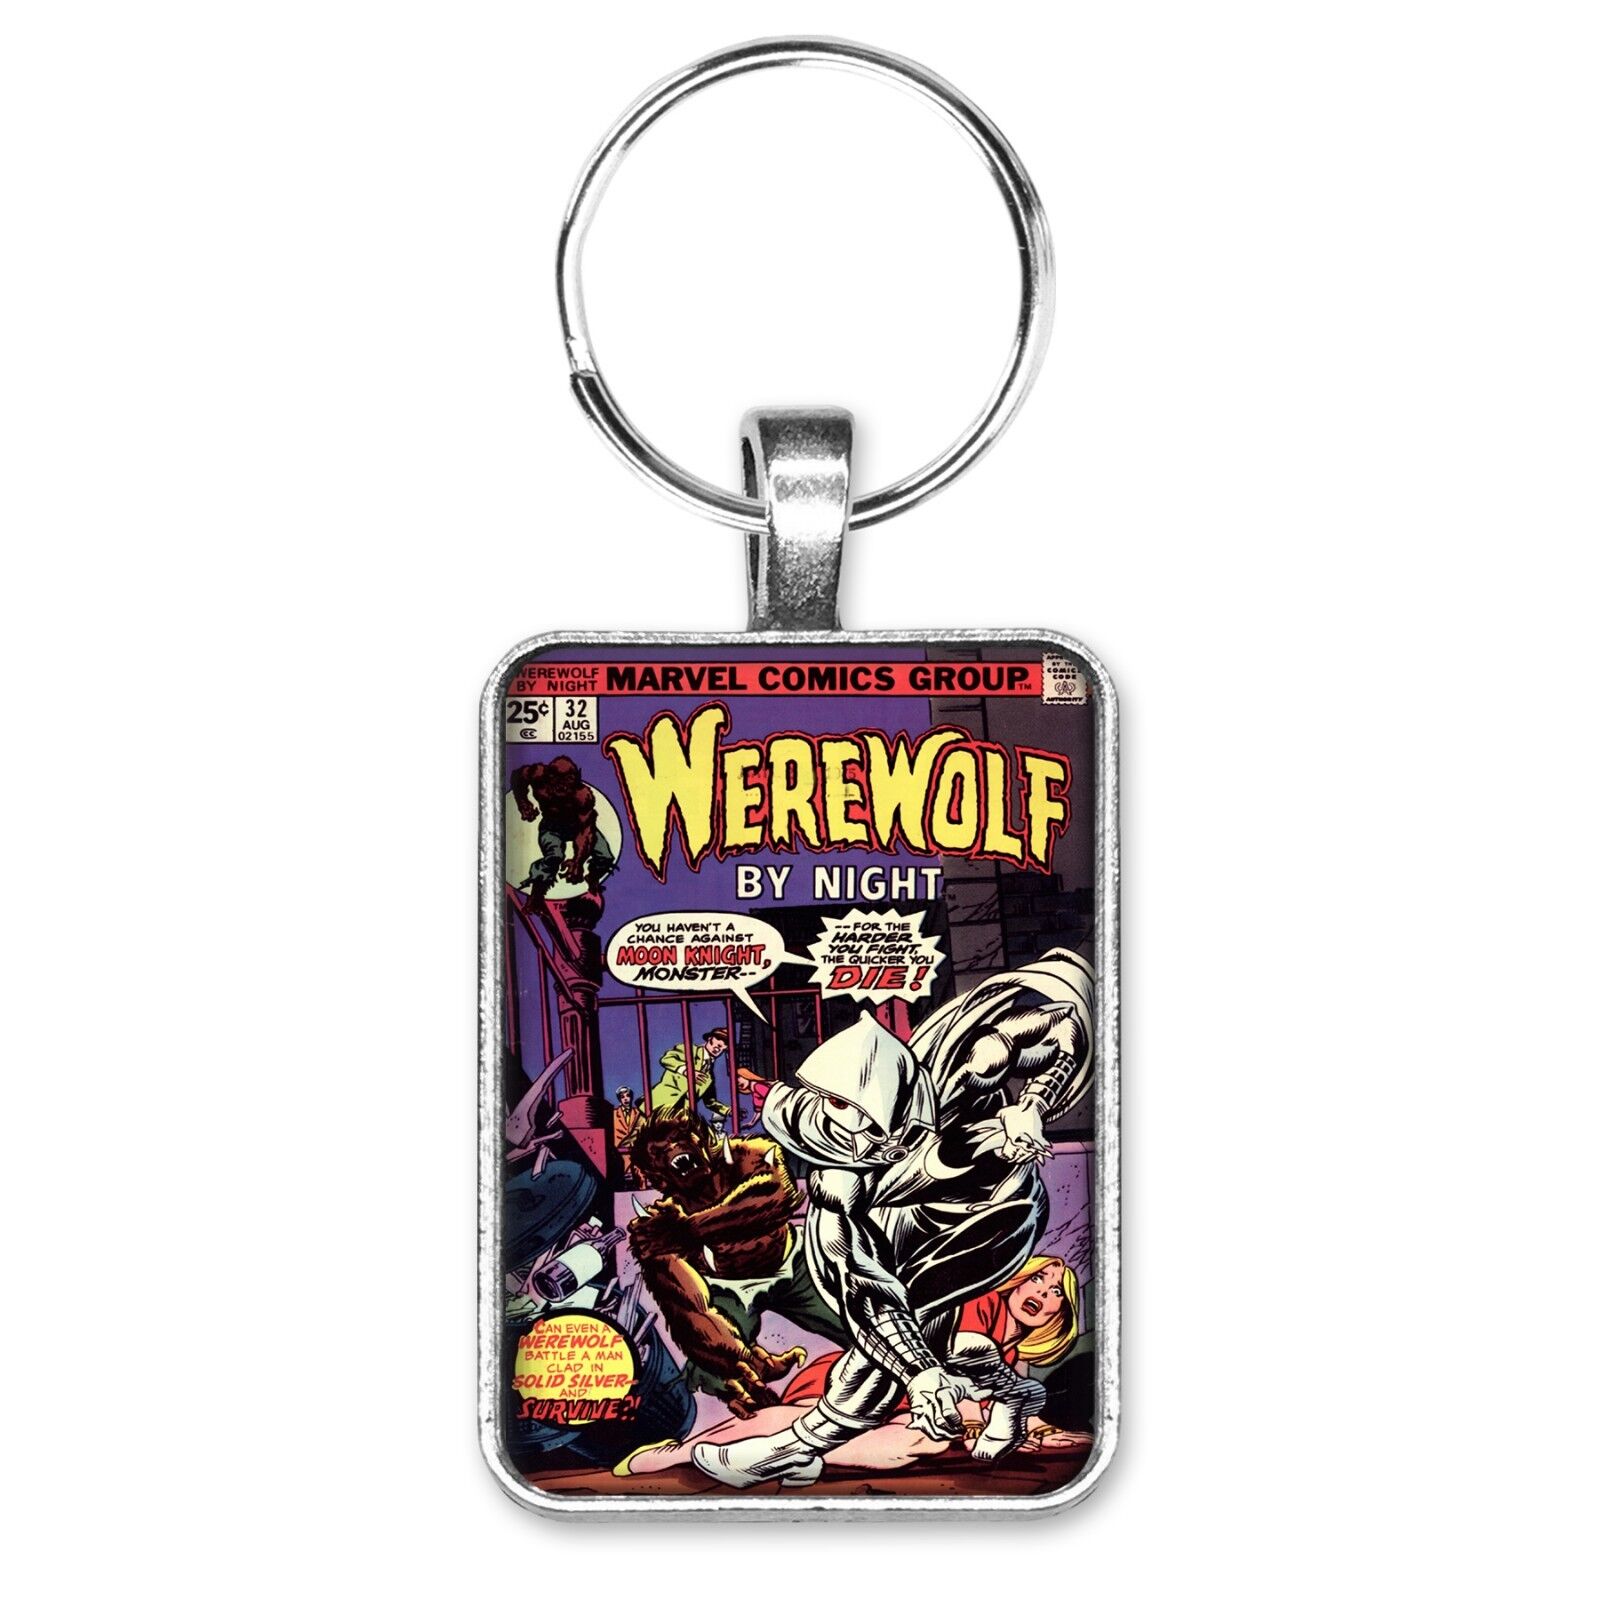 Werewolf By Night #32 Cover Key Ring or Necklace Moon Knight First Appearance